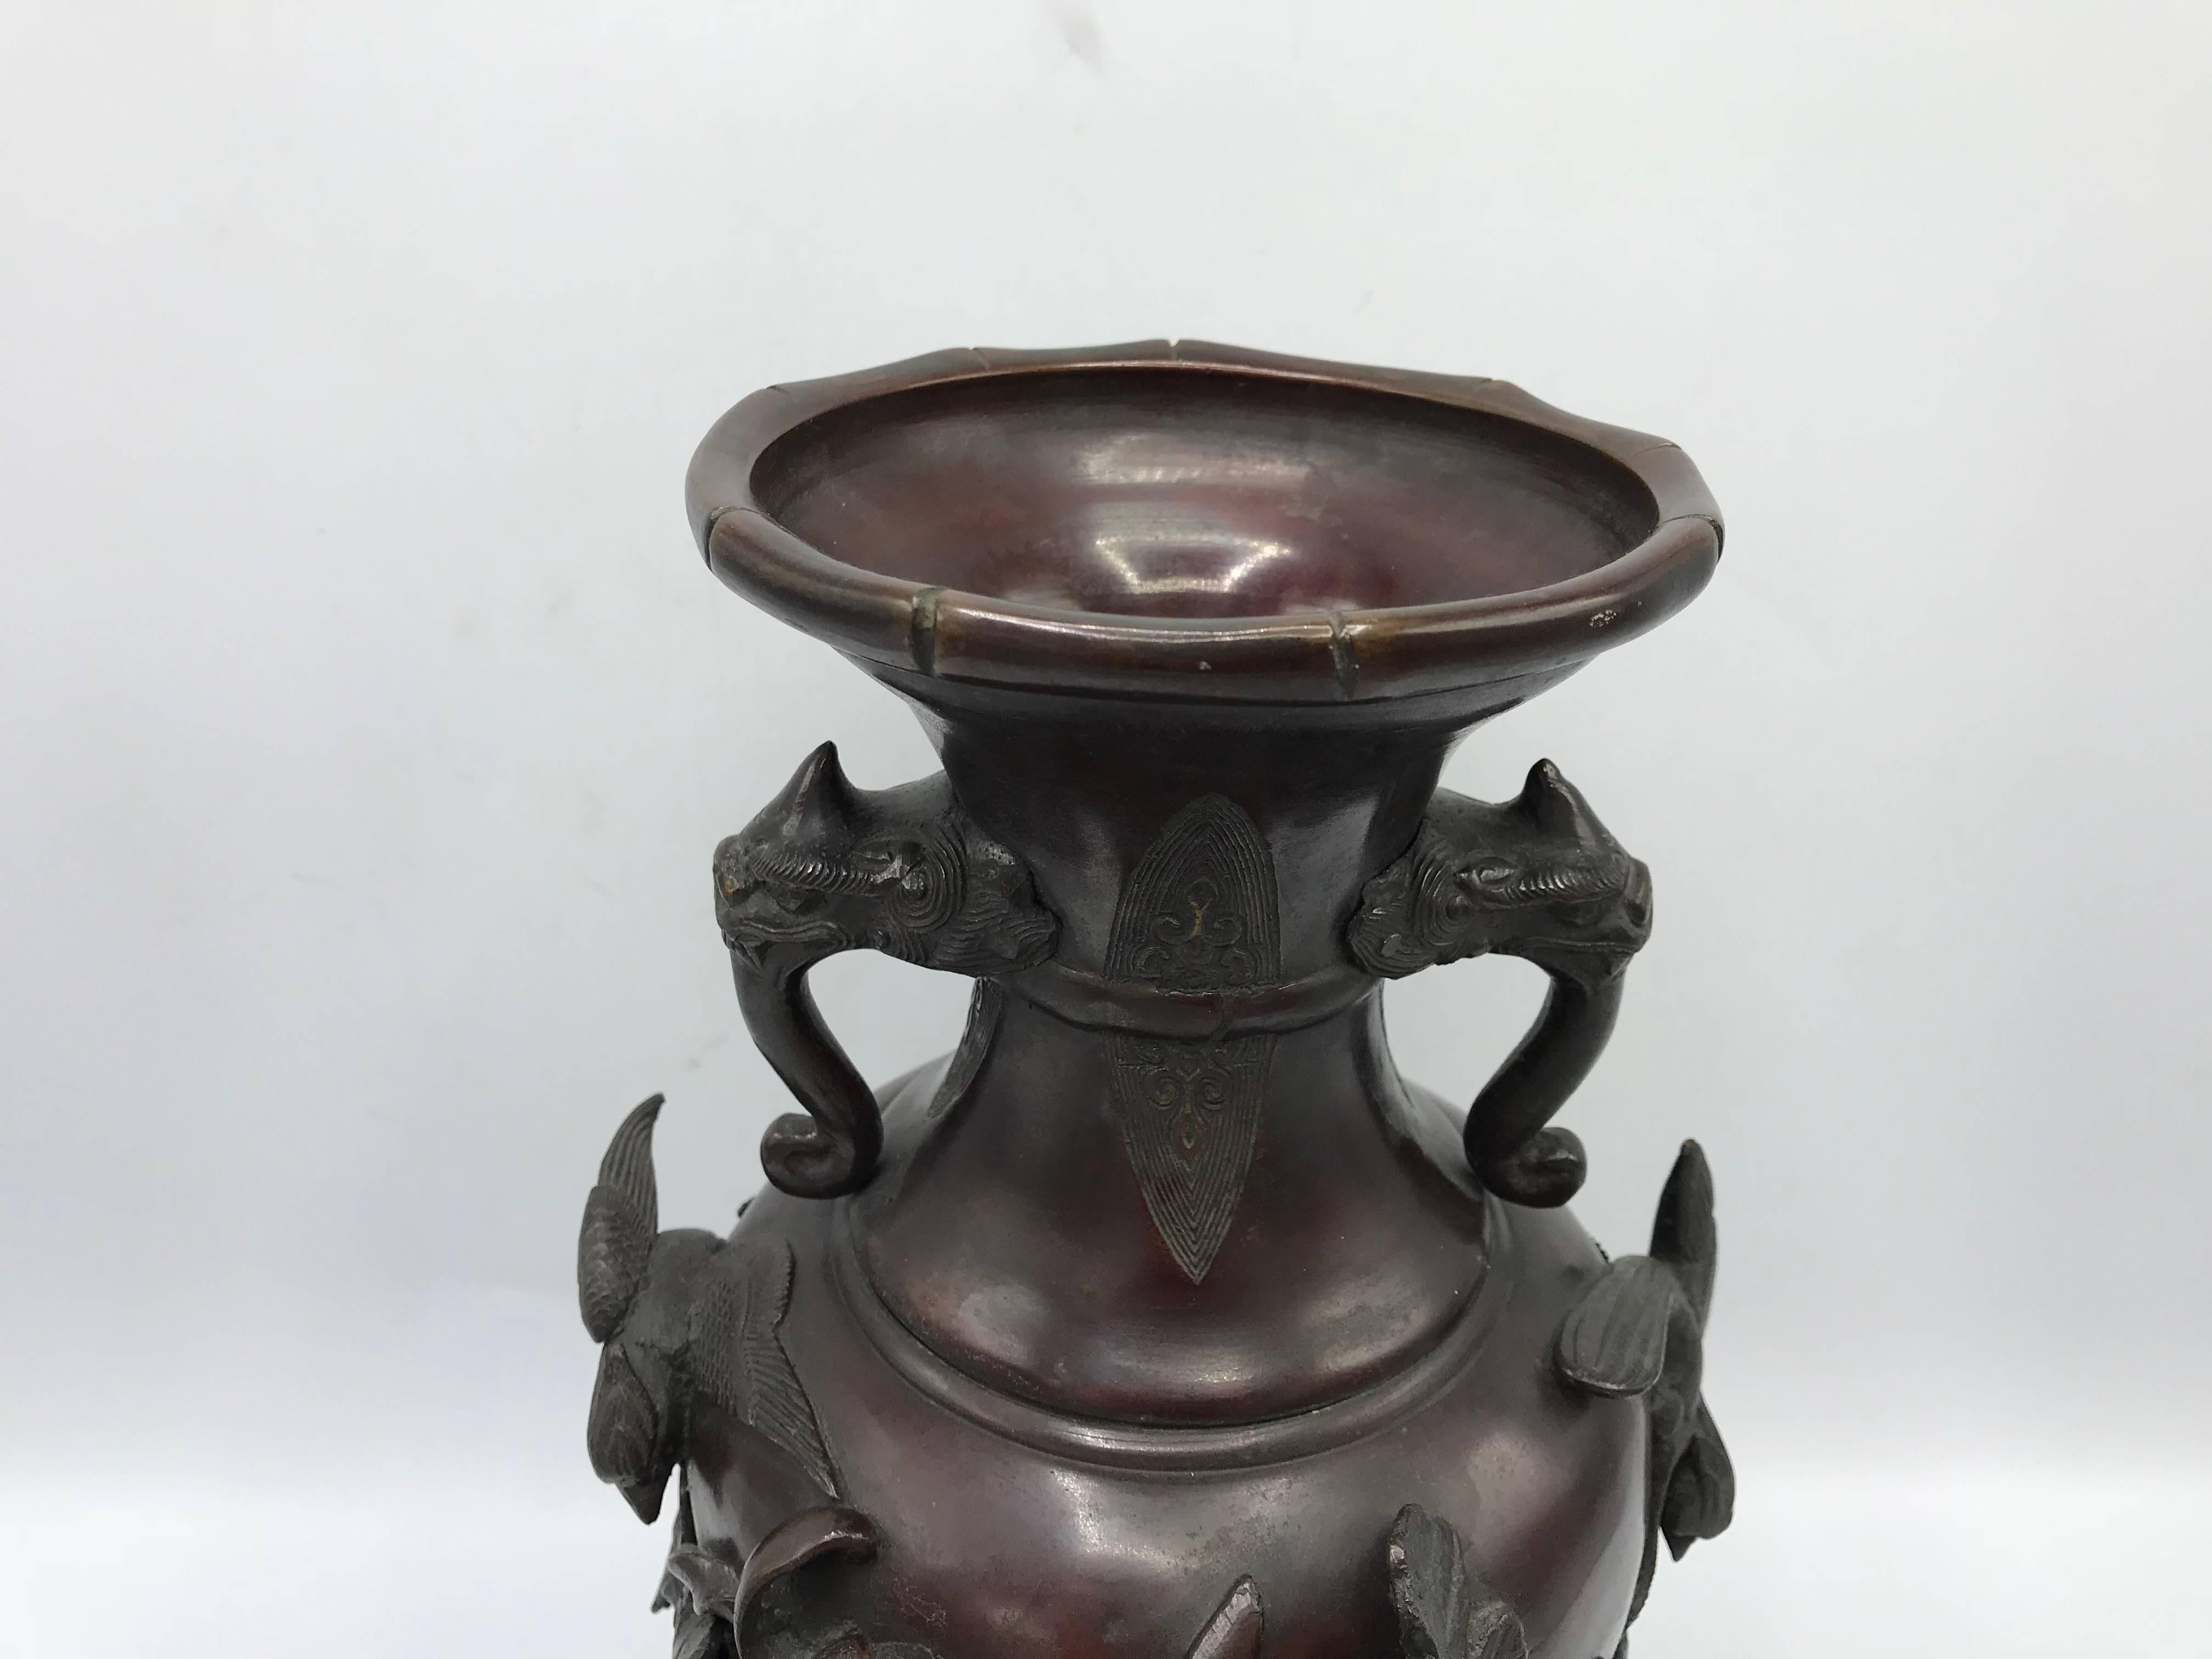 Offered is an exquisite, 19th Century, Meiji Period solid-bronze vase. The piece features immaculate, faux bamboo bordering along the top and bottom, sculptural elephants, turtles, and foliage. Mouth of vase is 4.75" wide. Stamped on underside.